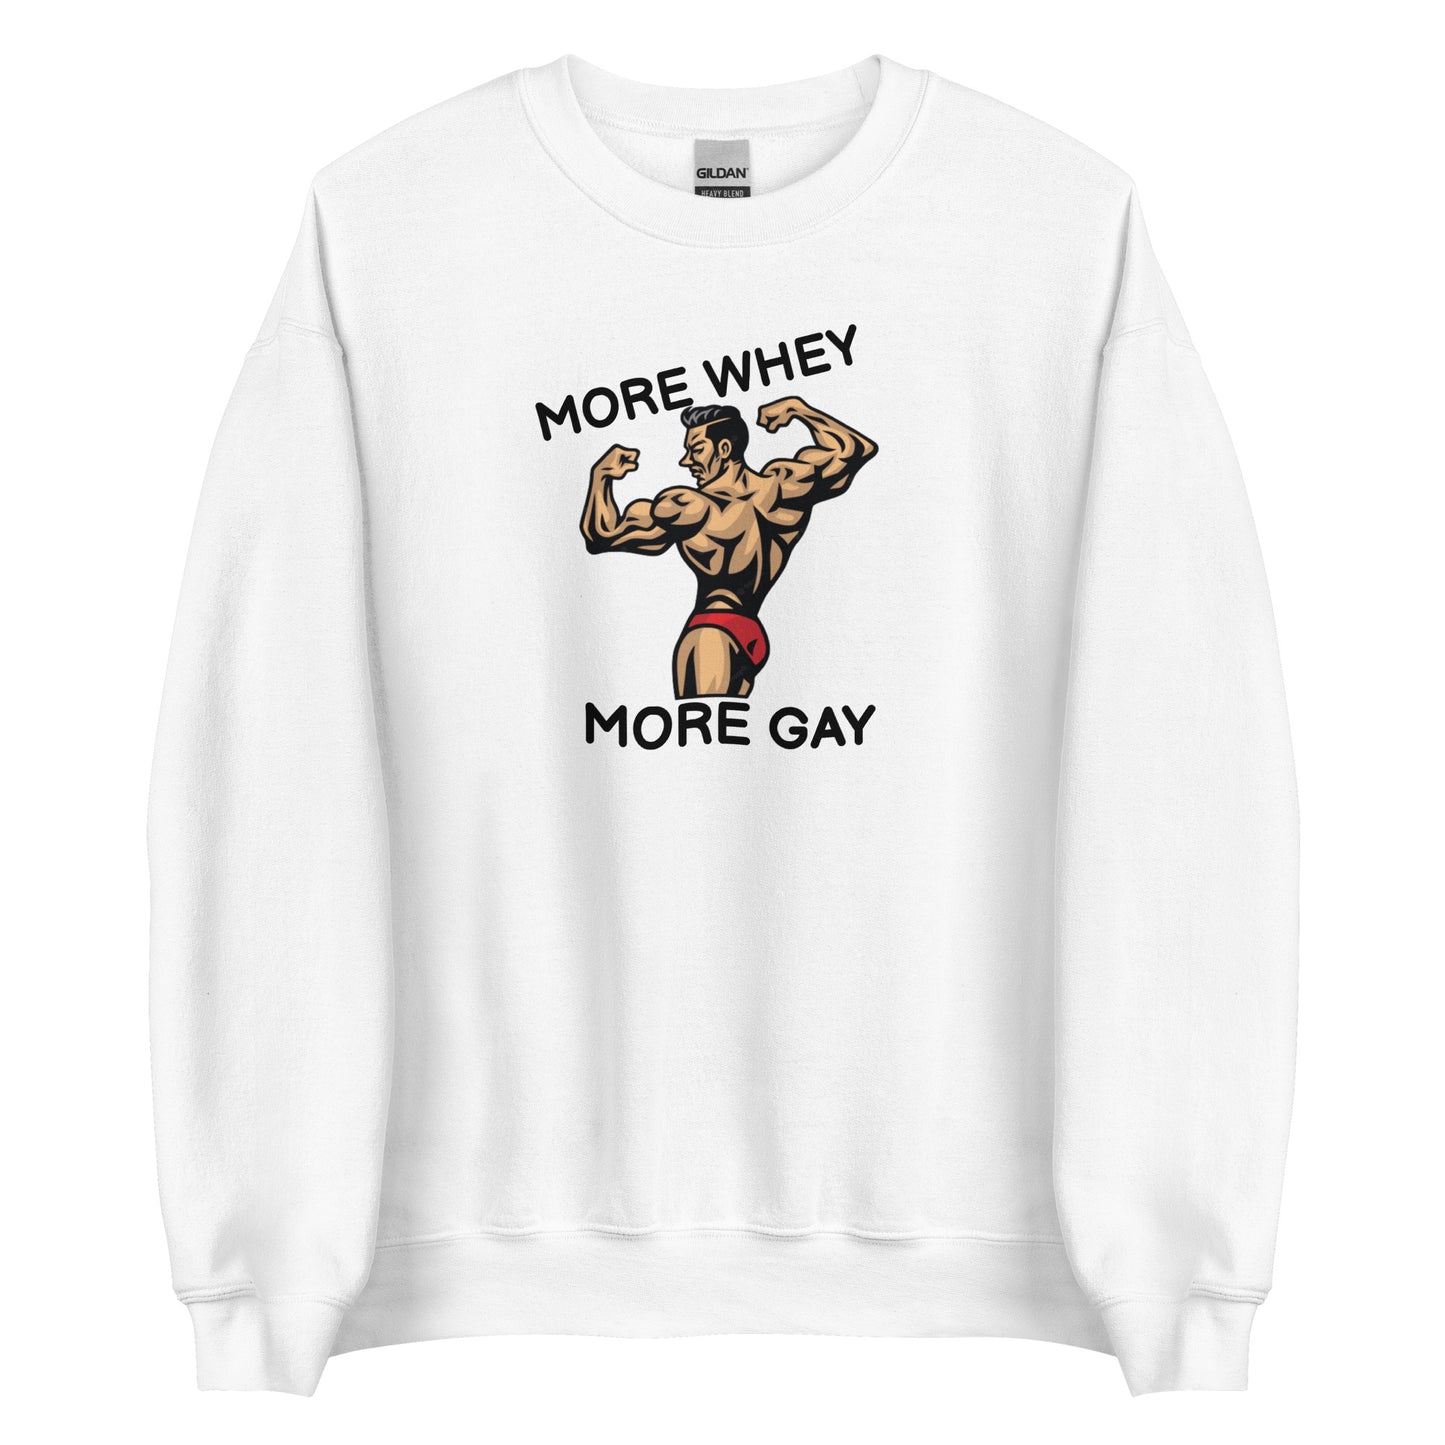 MORE WHEY MORE GAY